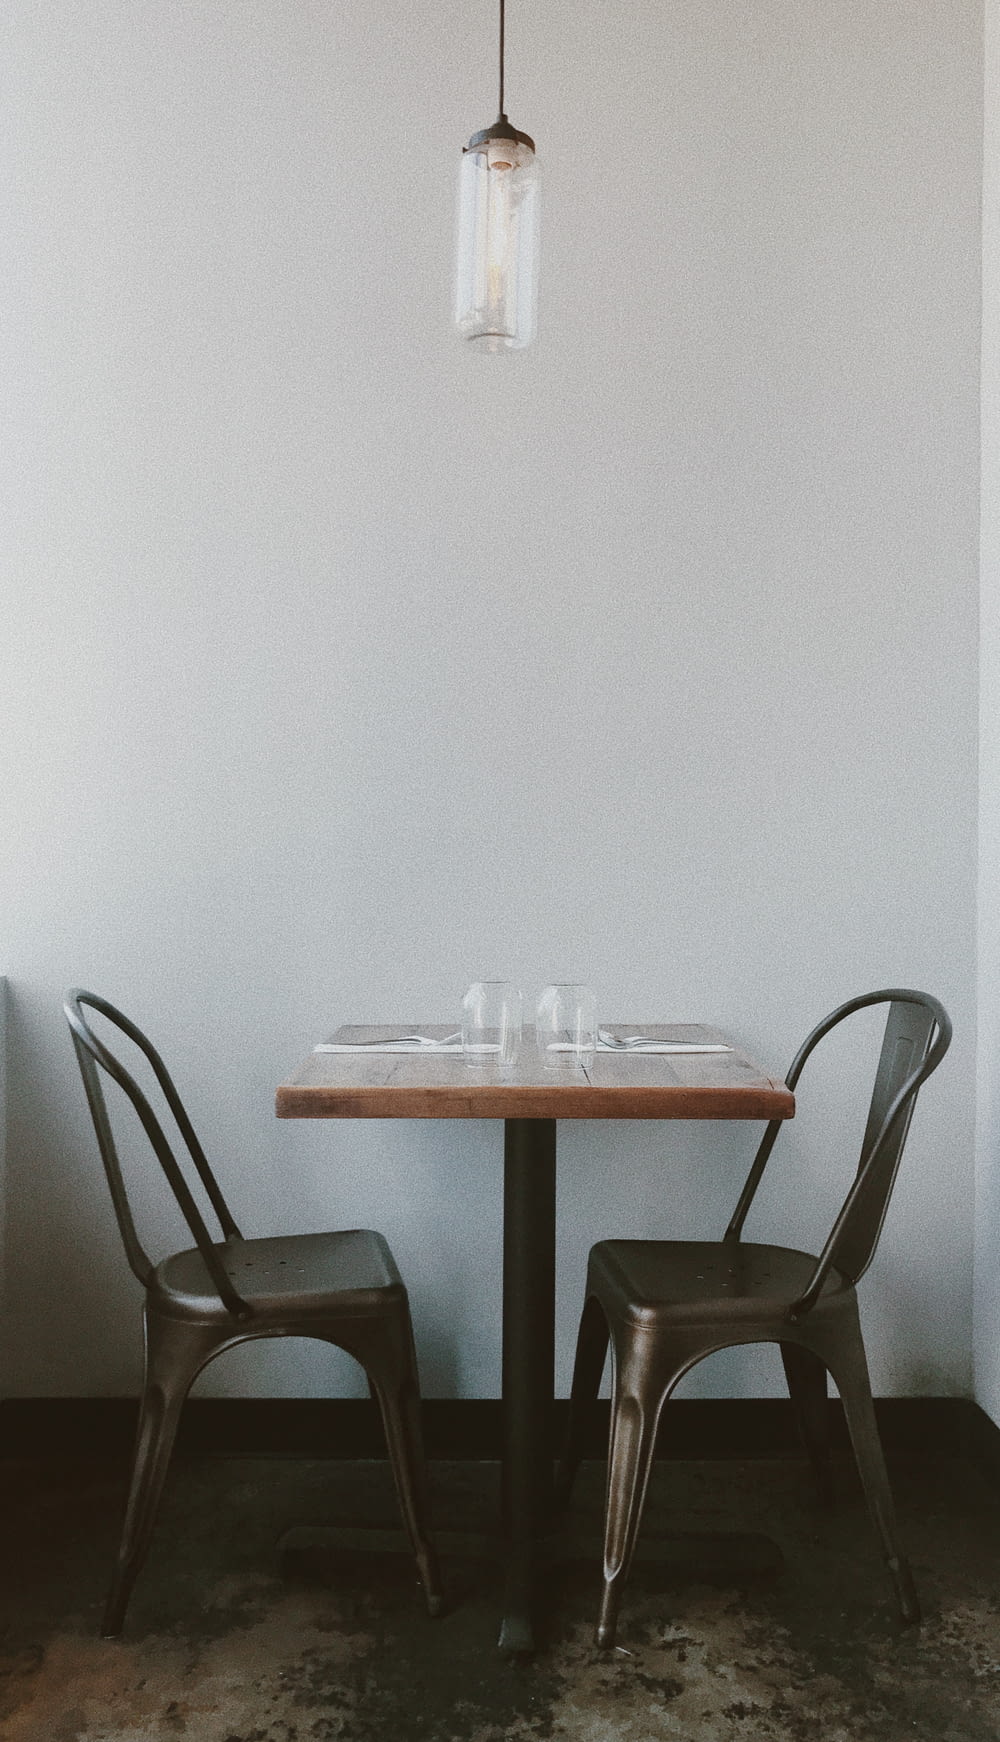 white and brown wooden table with chairs